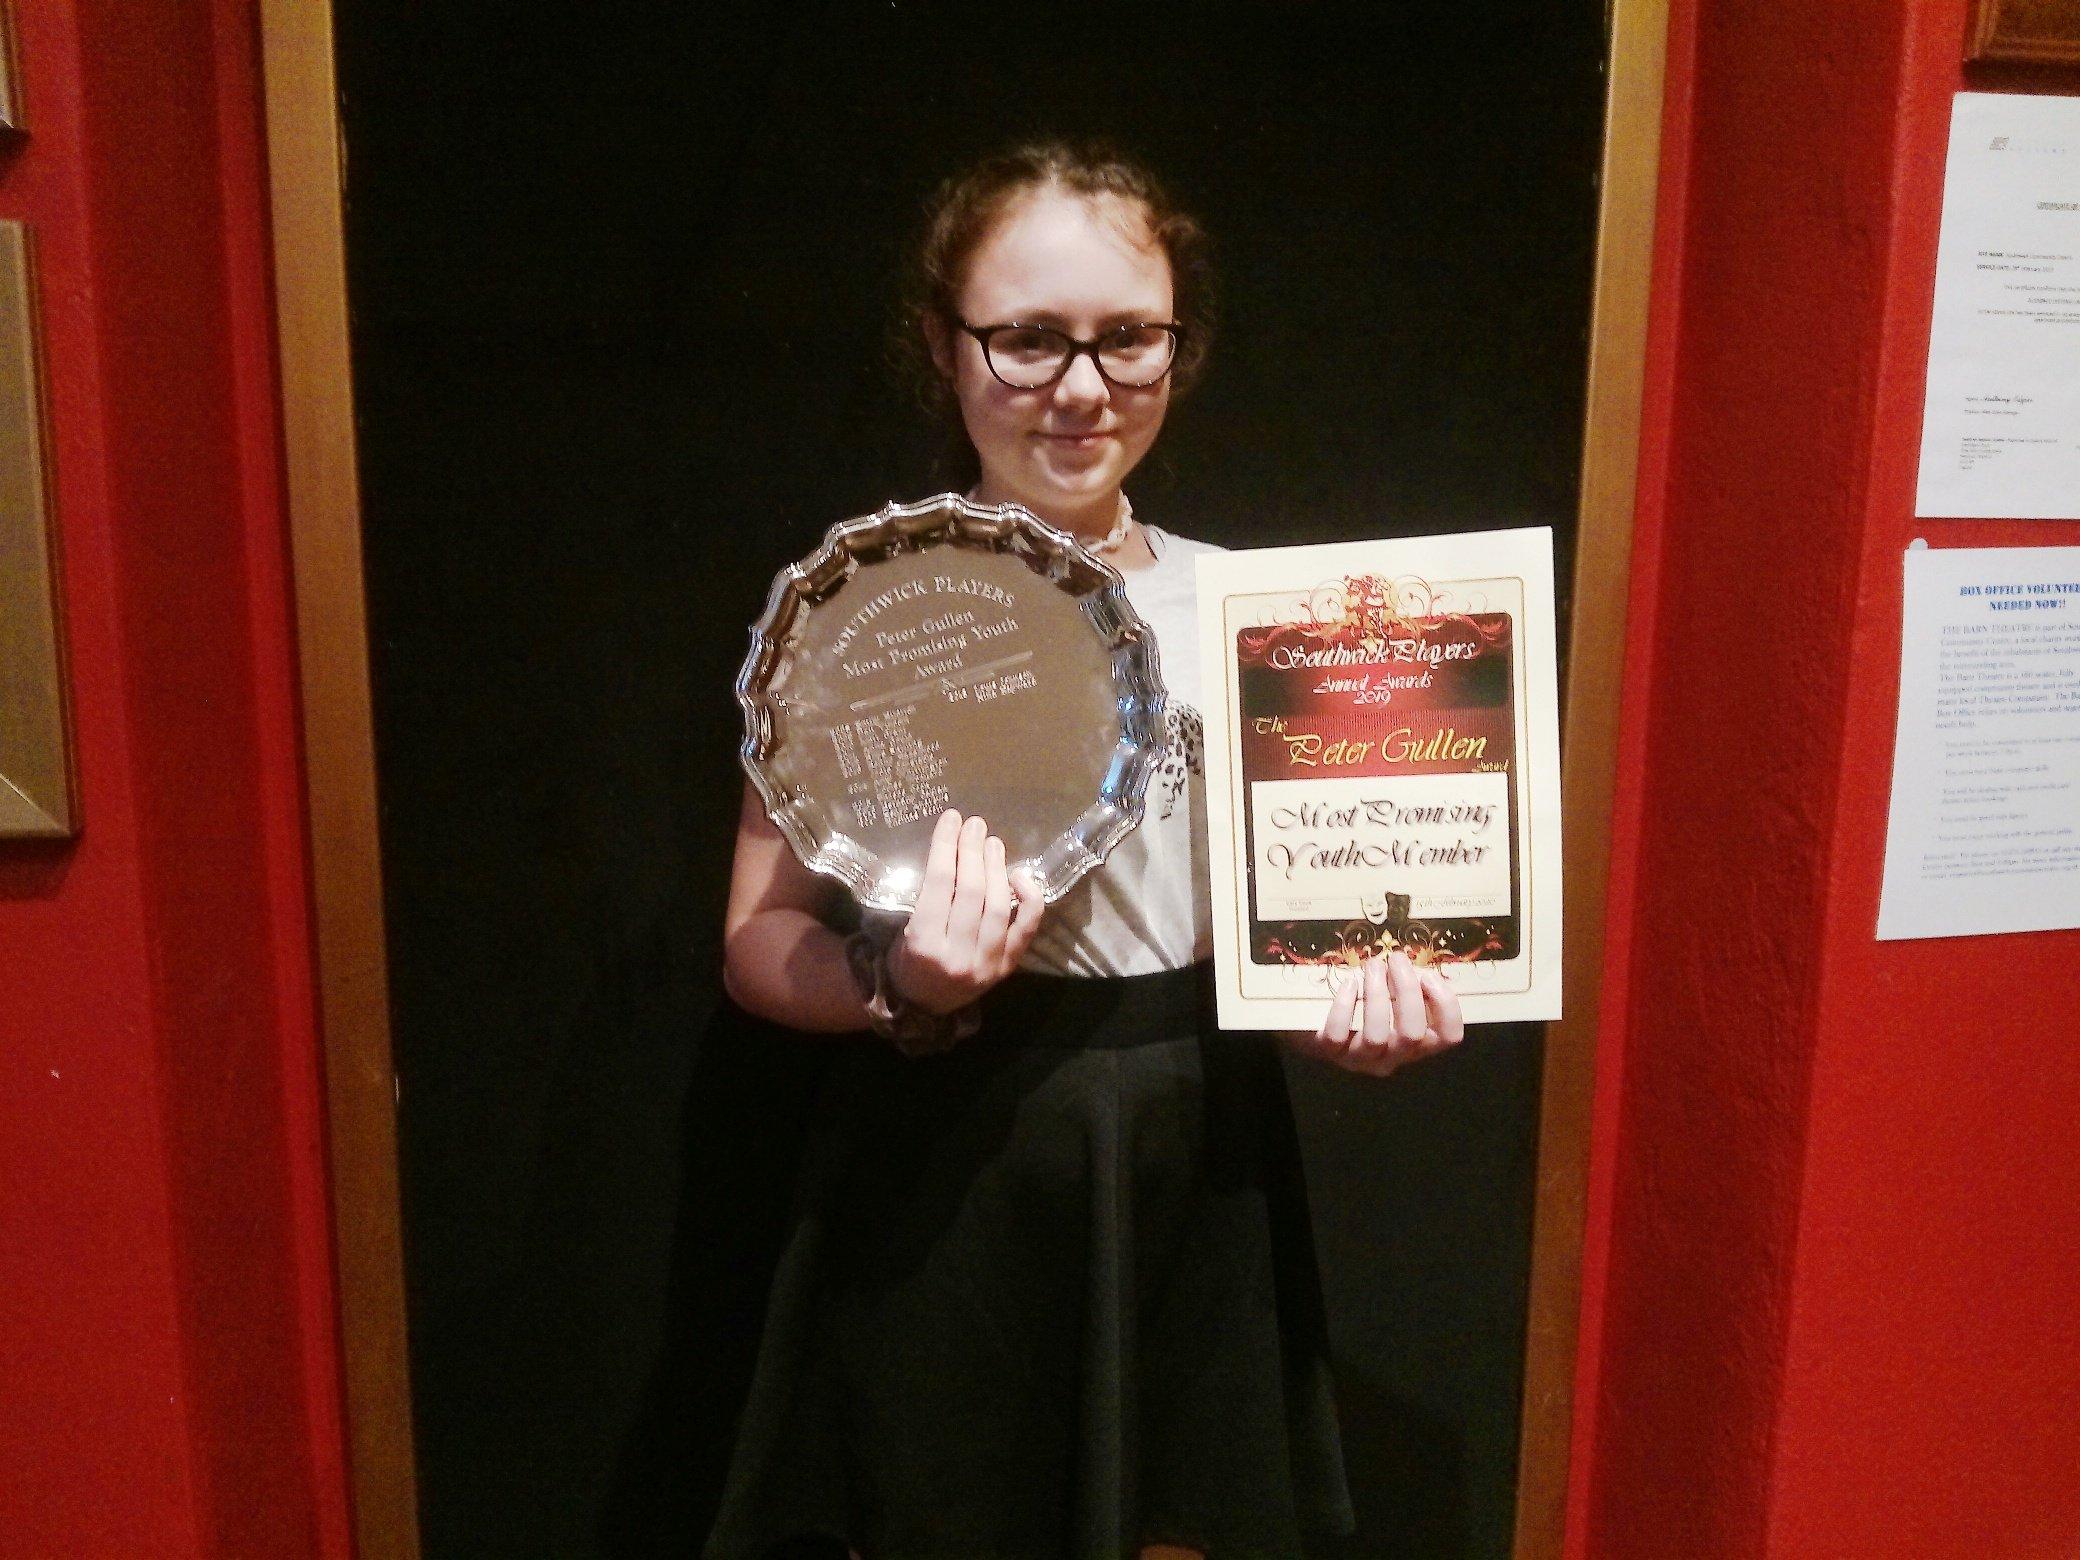 Elodie Danzelman, 14, won the Peter Gullen Award for most promising youth member